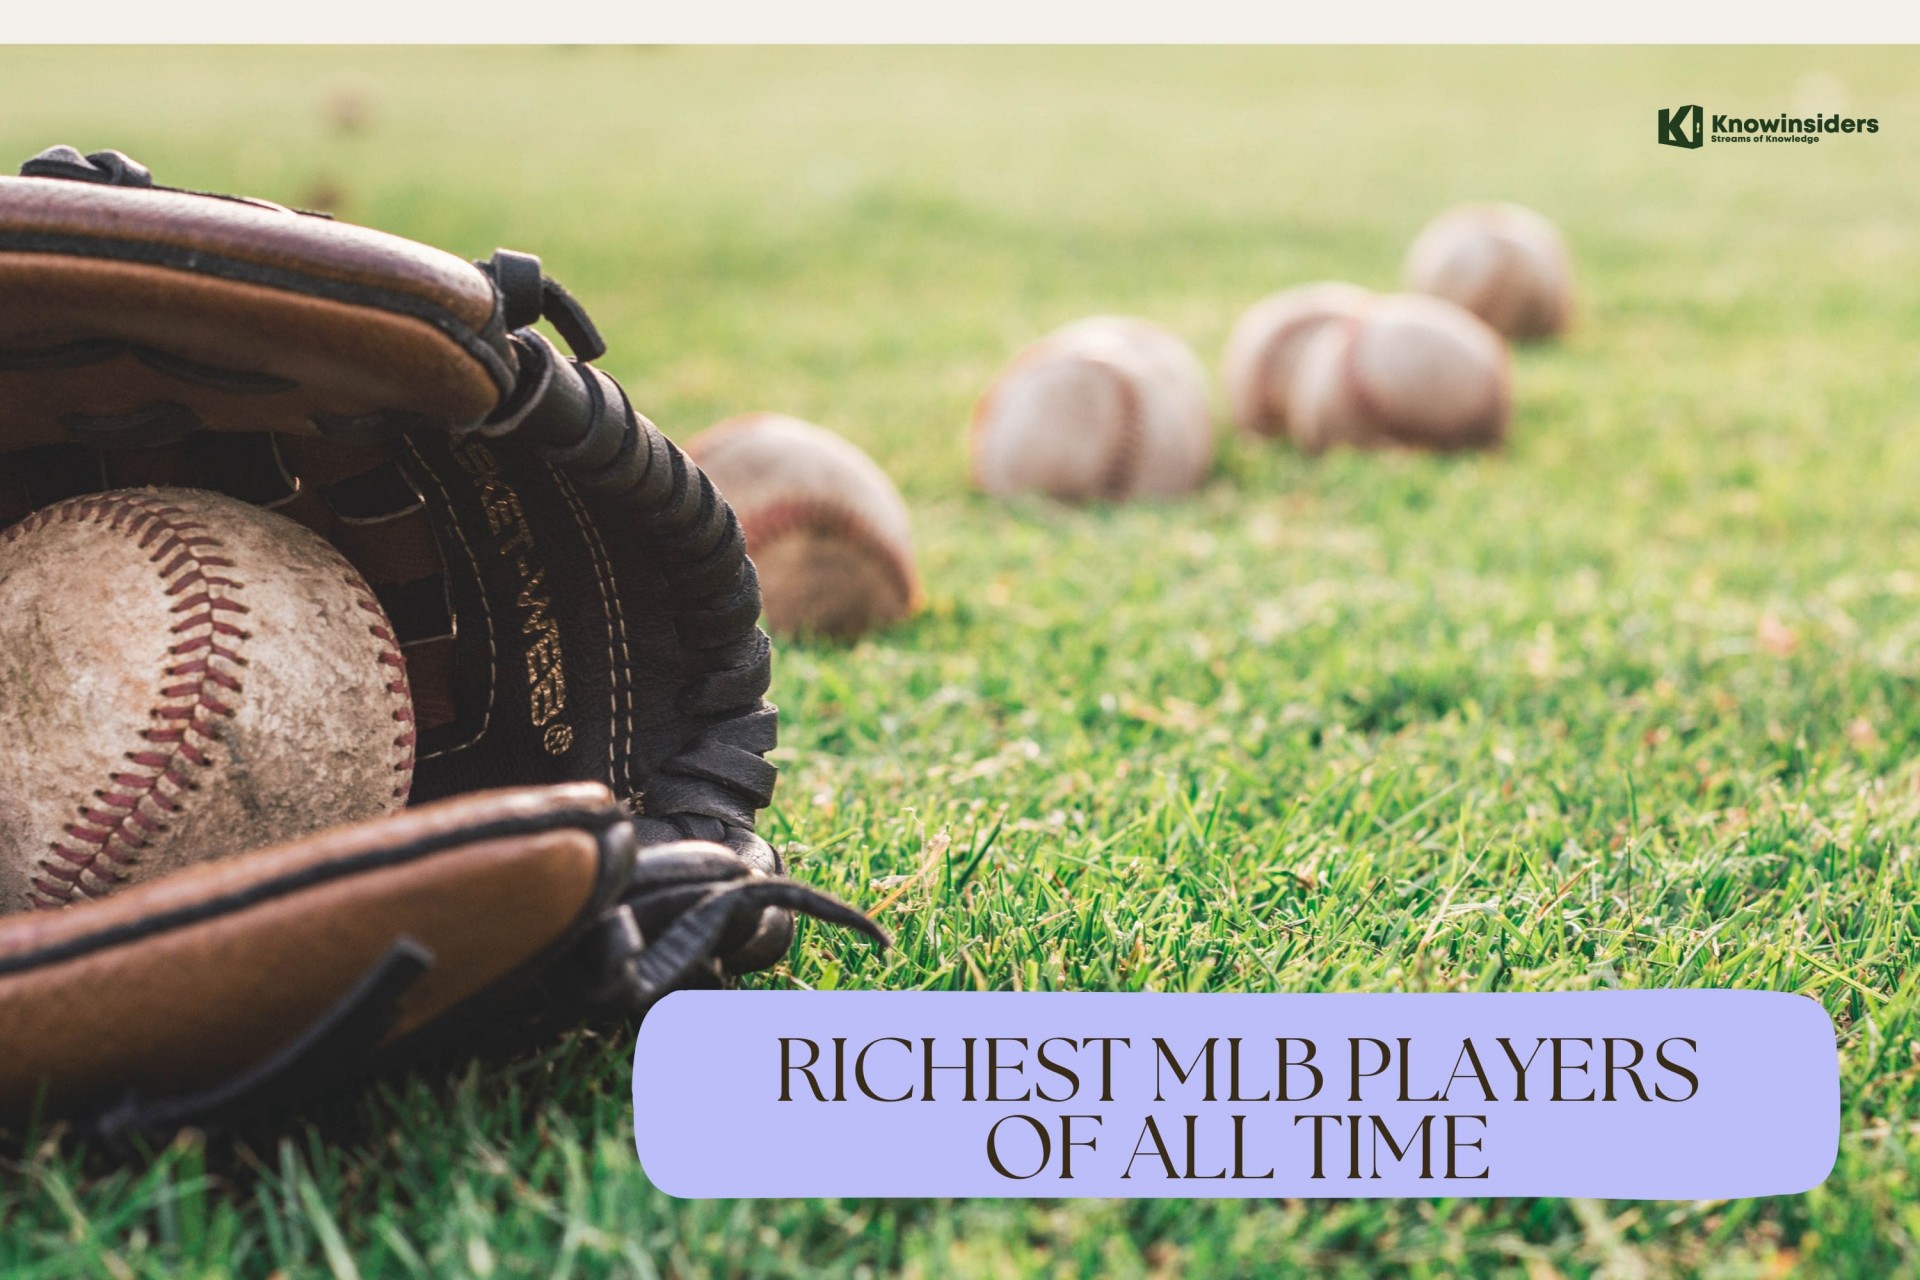 Top 10 Richest MLB Players of All Time